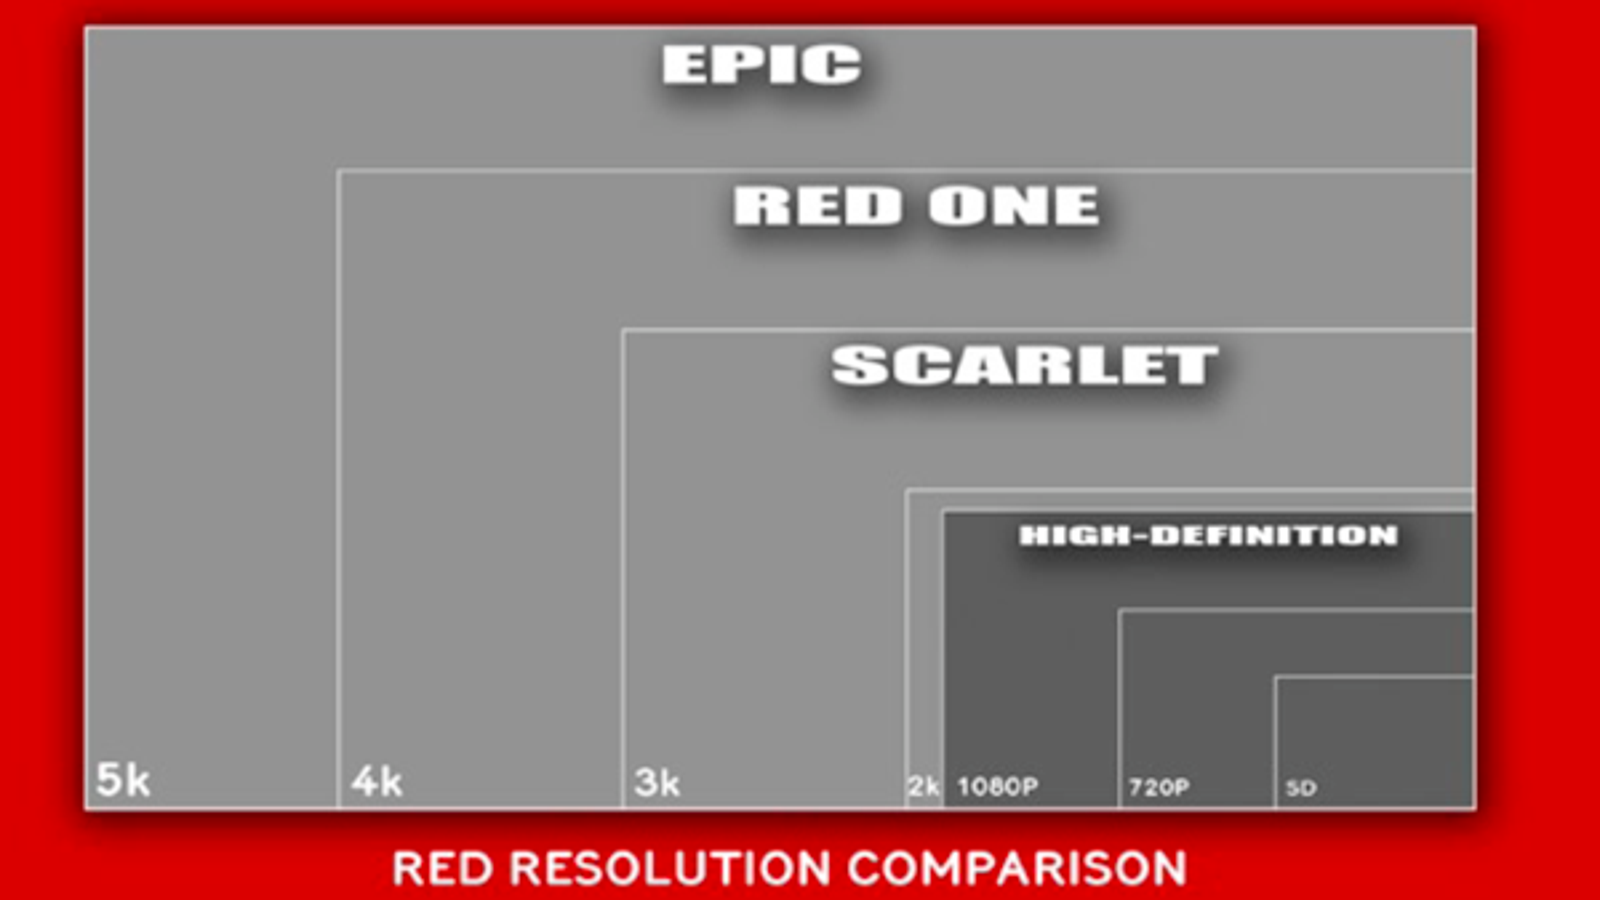 What is 3k resolution